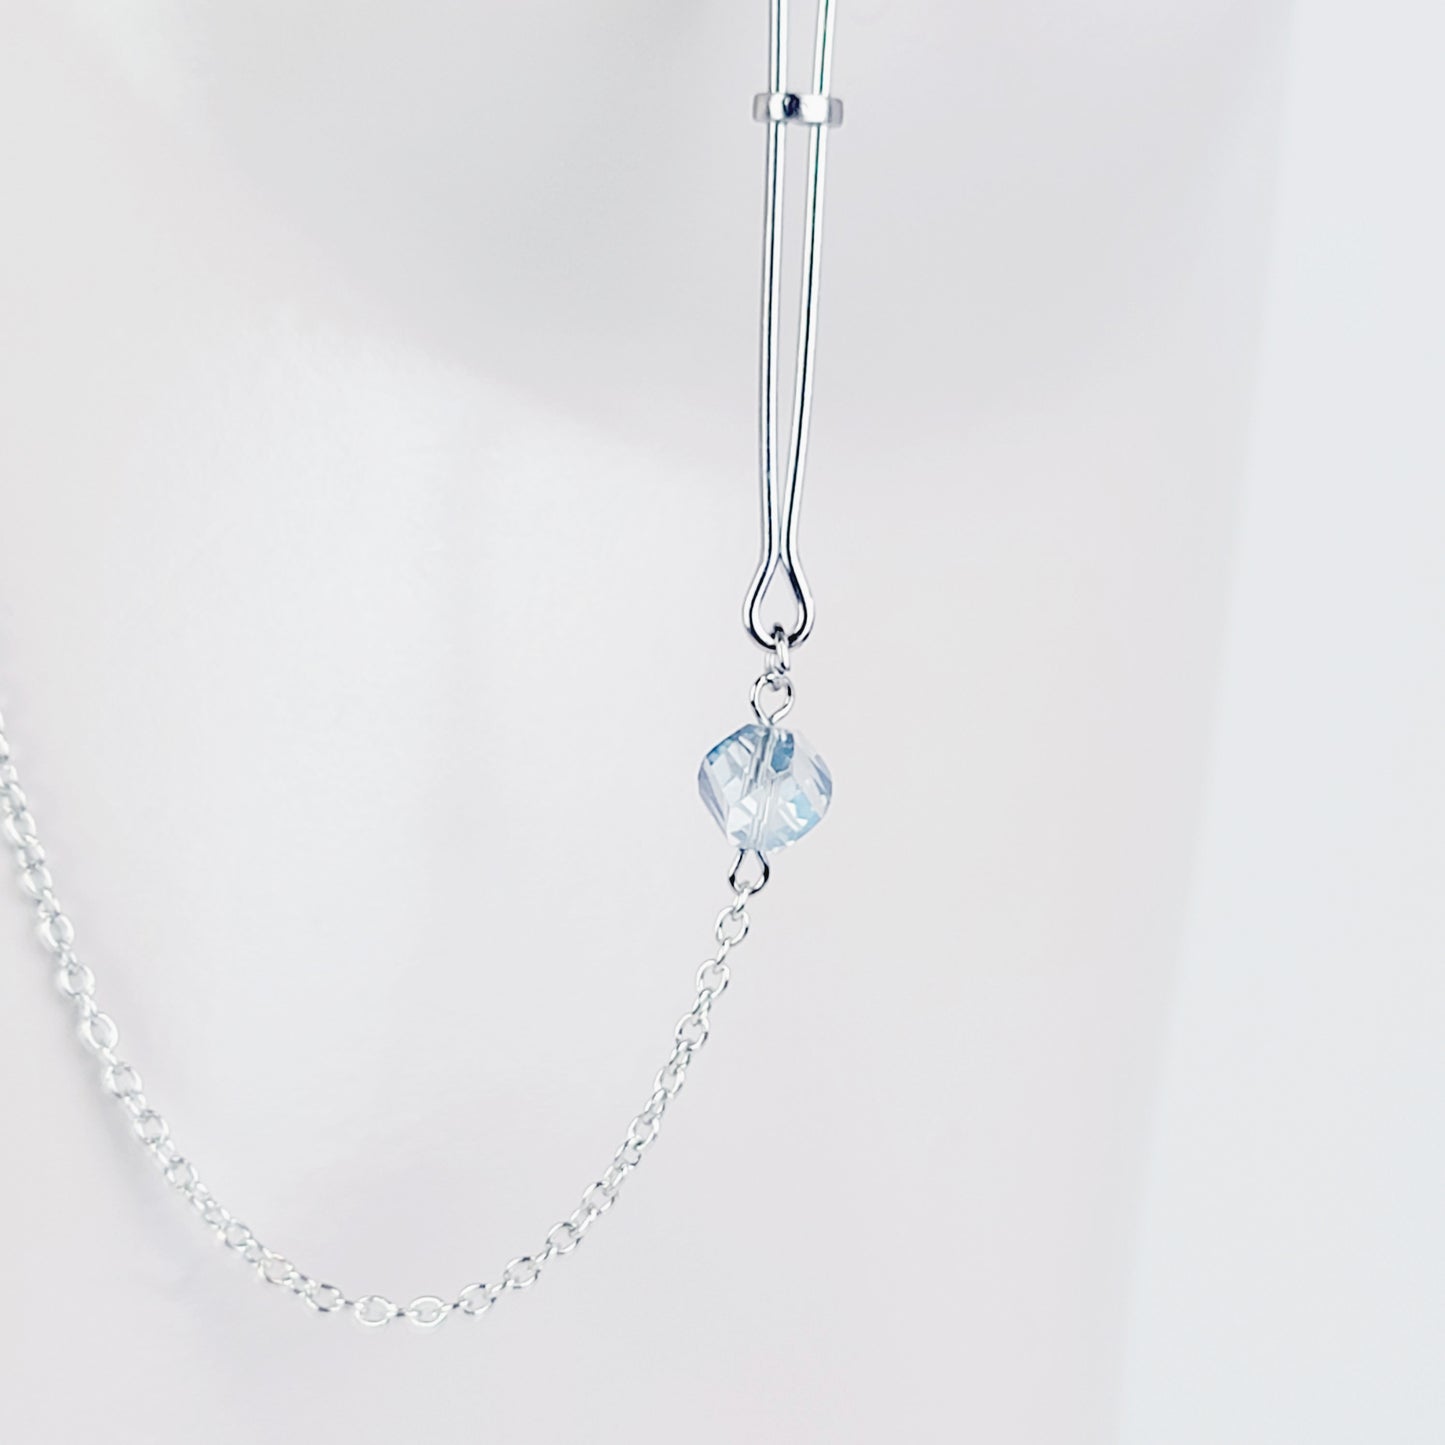 Snowflake Necklace to Nipple with Non Piercing Nipple Nooses or Your Choice of Nipple Clamps ( Tweezer Clamps shown). MATURE, BDSM